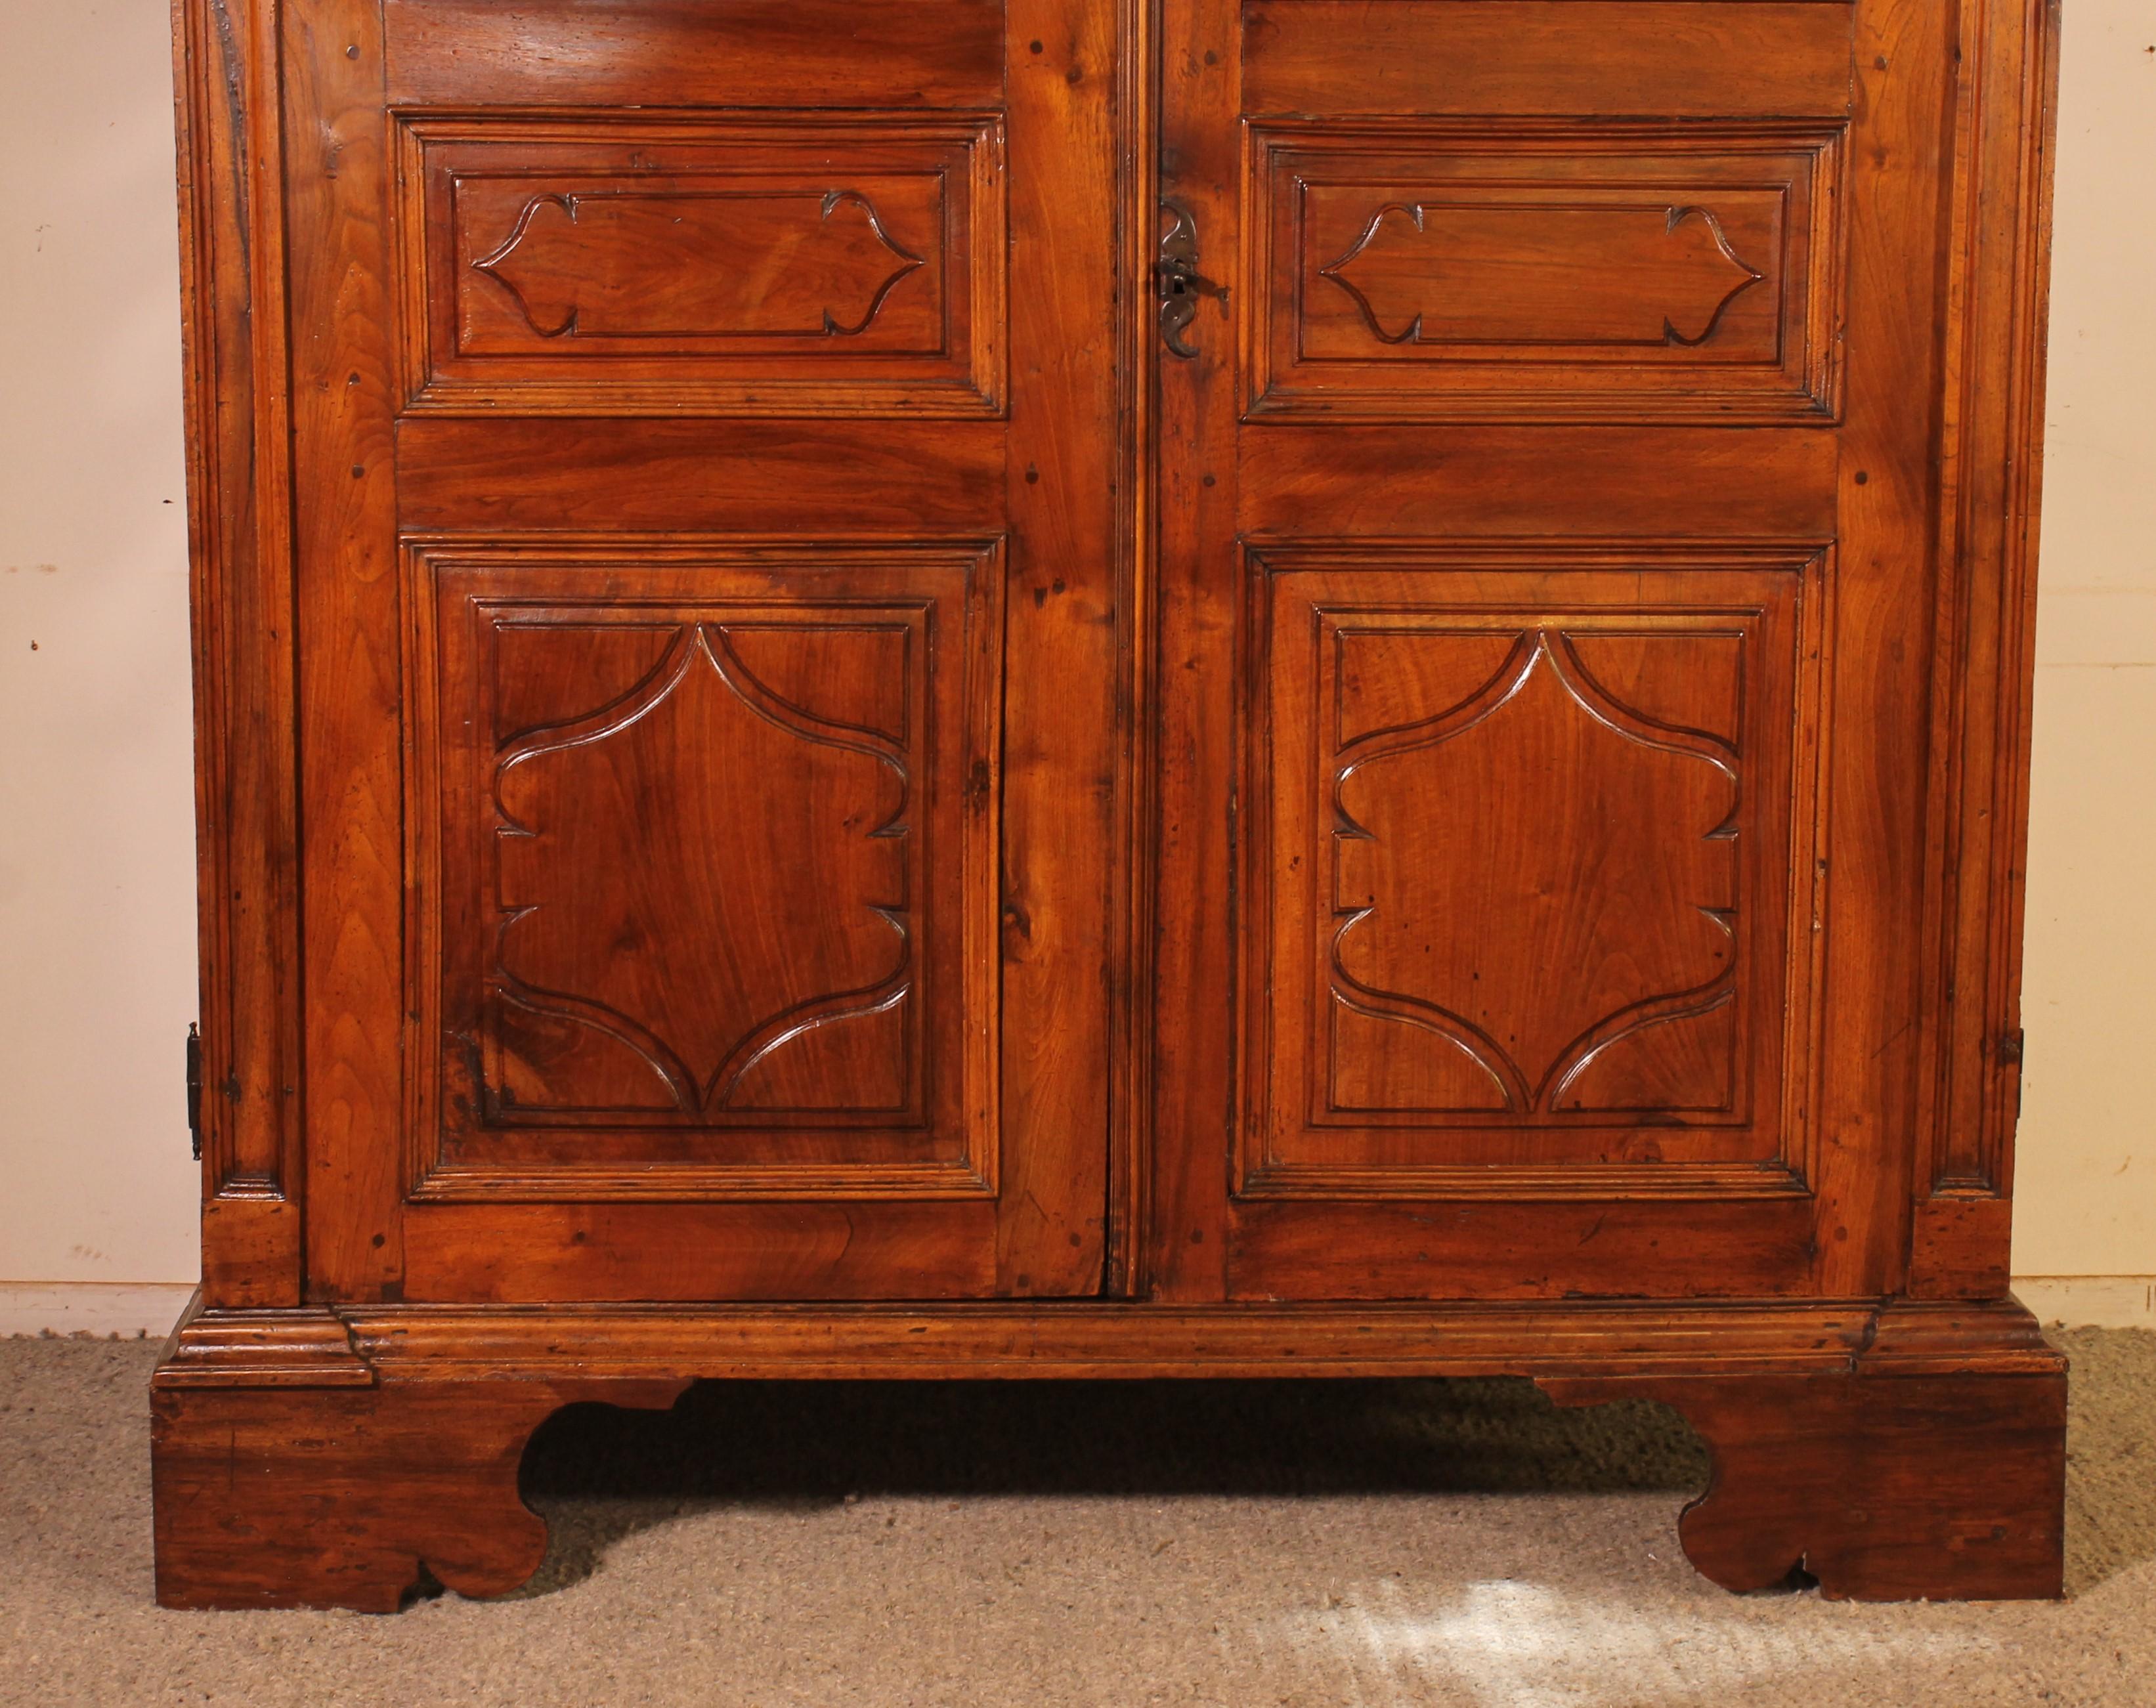 Superb cabinet in solid walnut from the 17th century from Italy

Very beautiful and rare Italian workmanship with a superb carved top as well as base. Typical of Italian wardrobes and furniture pieces of this period

The doors and sides are